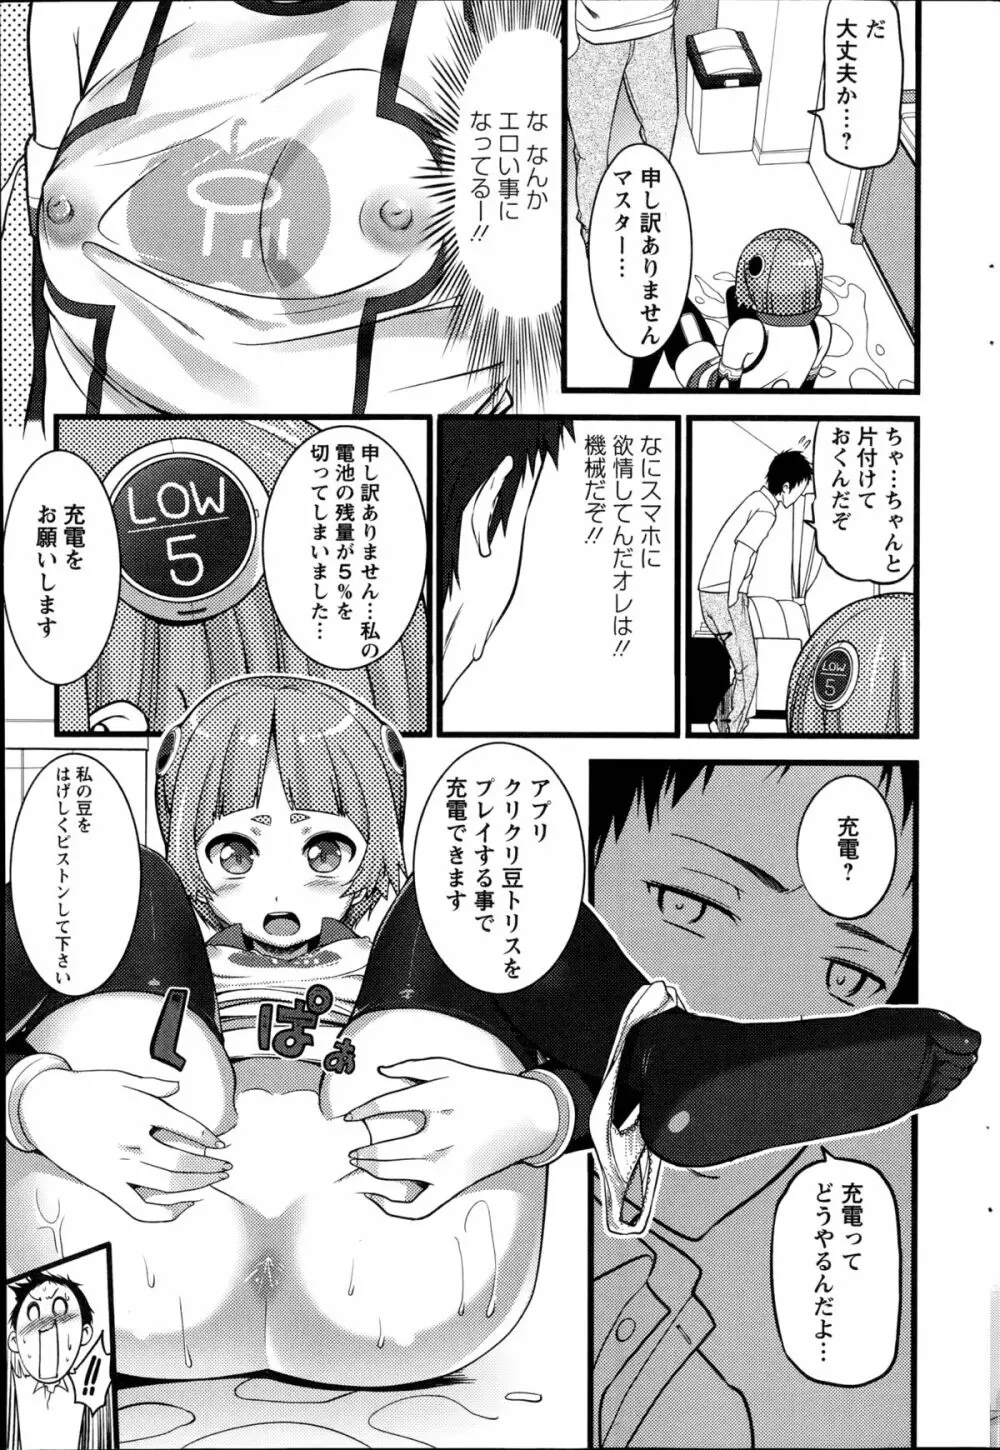 Pear Phone 第1-2章 Page.13